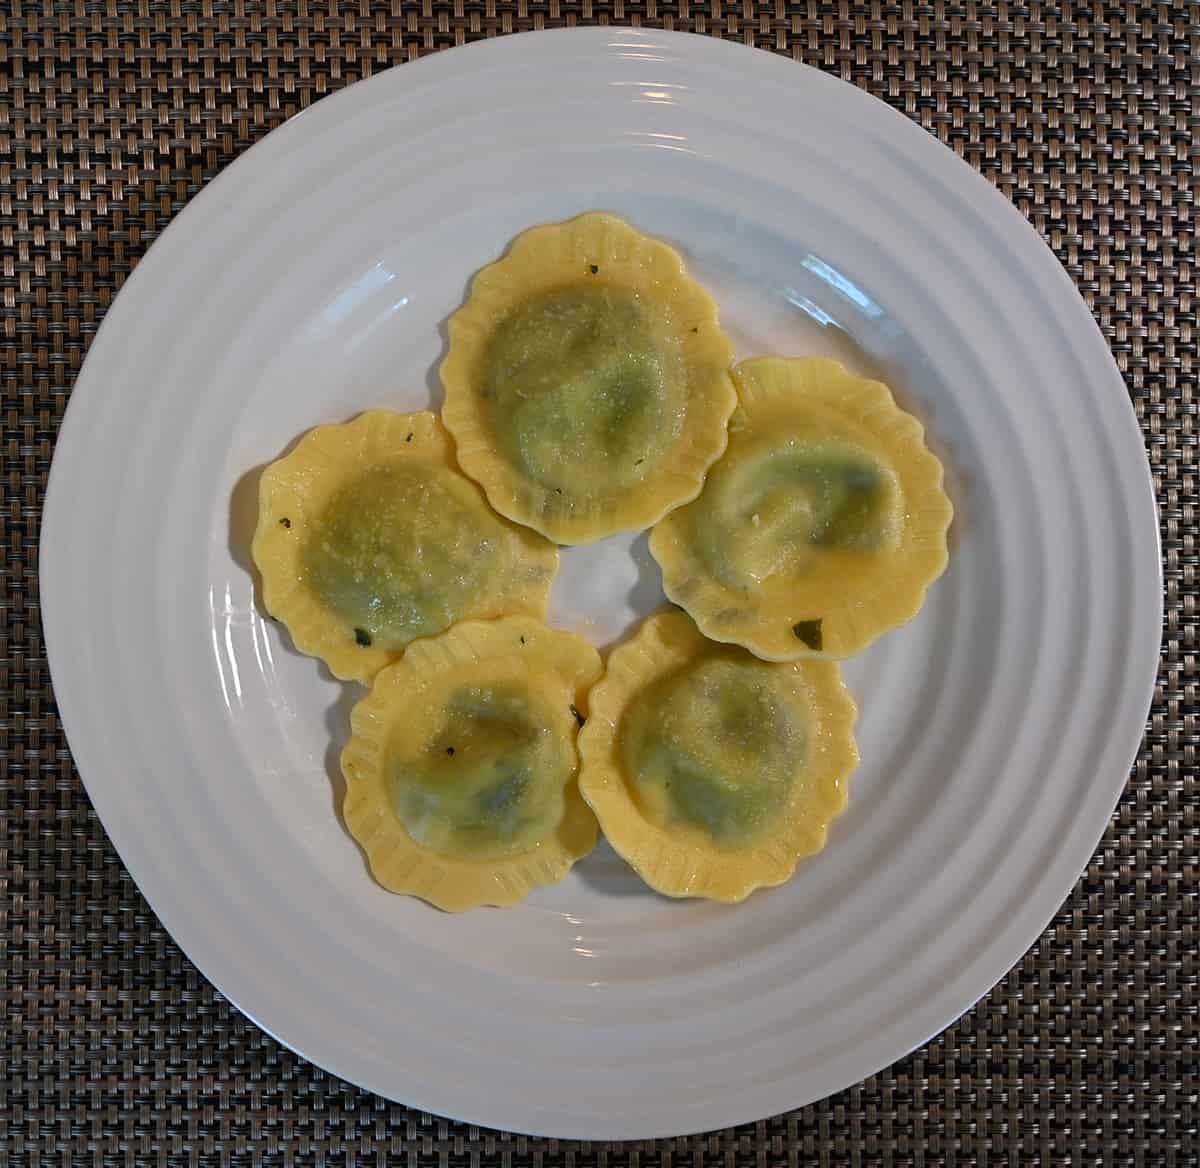 Top down image of a white plate with five ravioli served on it, the ravioli do not have any sauce.